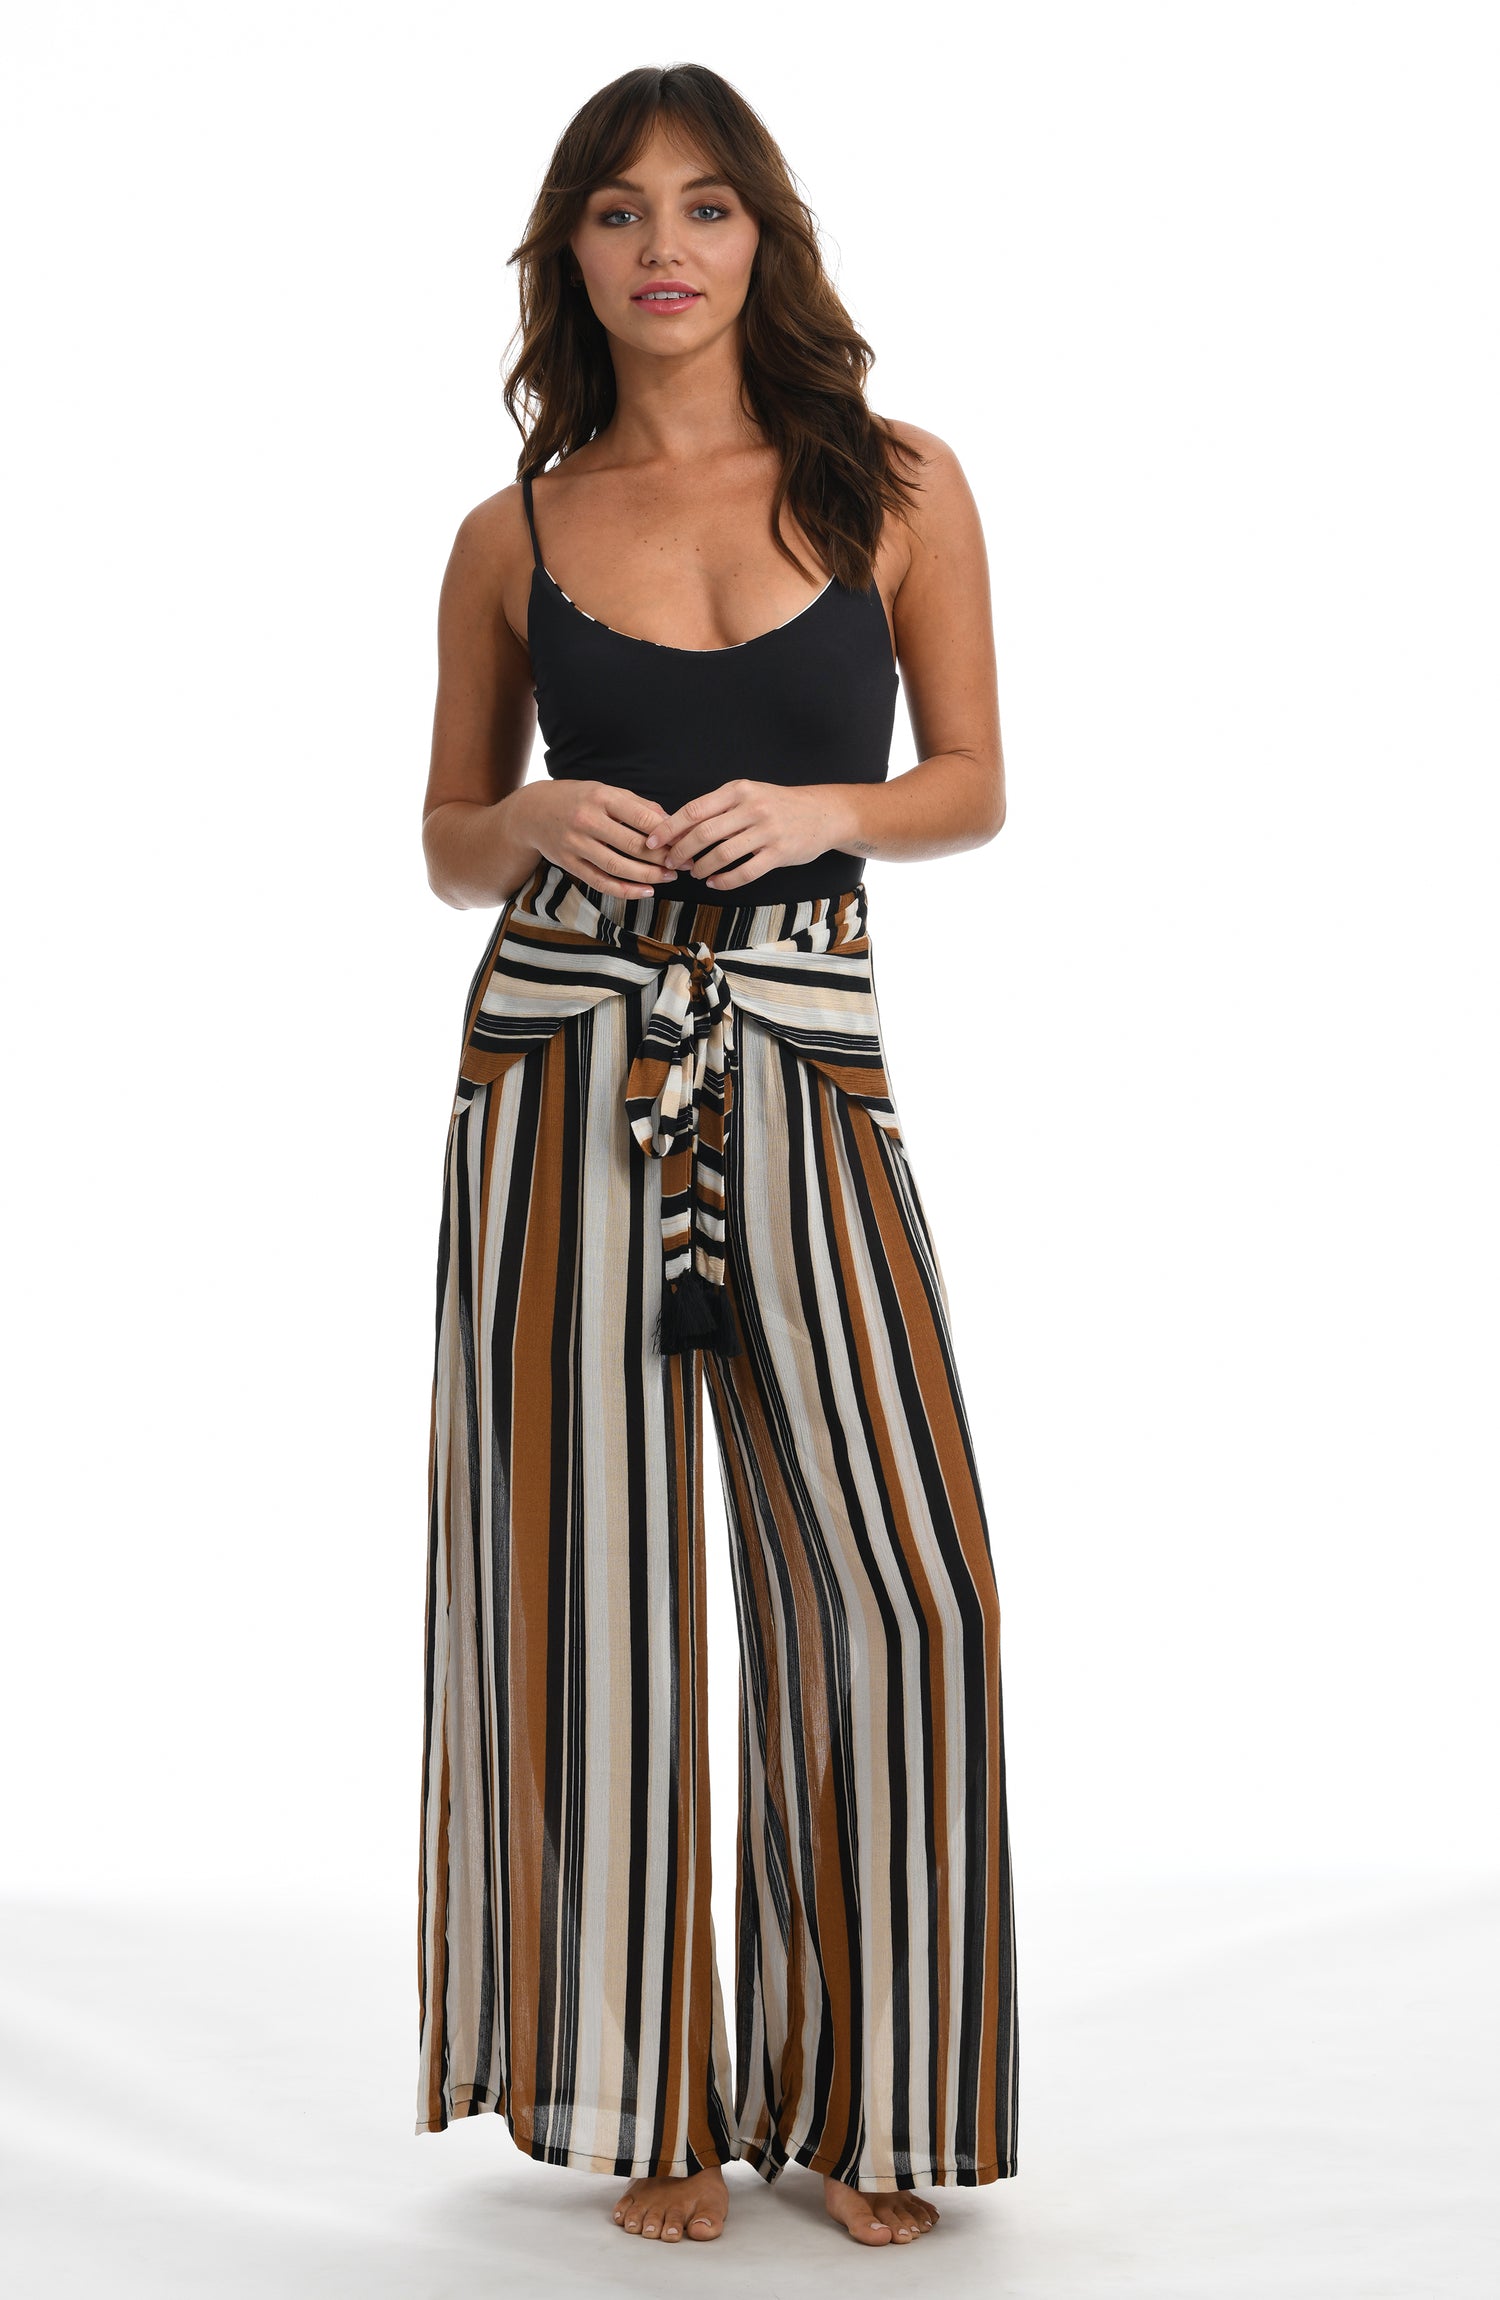 Model is wearing a retro inspired printed beach pant swimsuit cover up with diagonal stripes and floral medallions in brown earthy tones from our 70's Stripe collection.